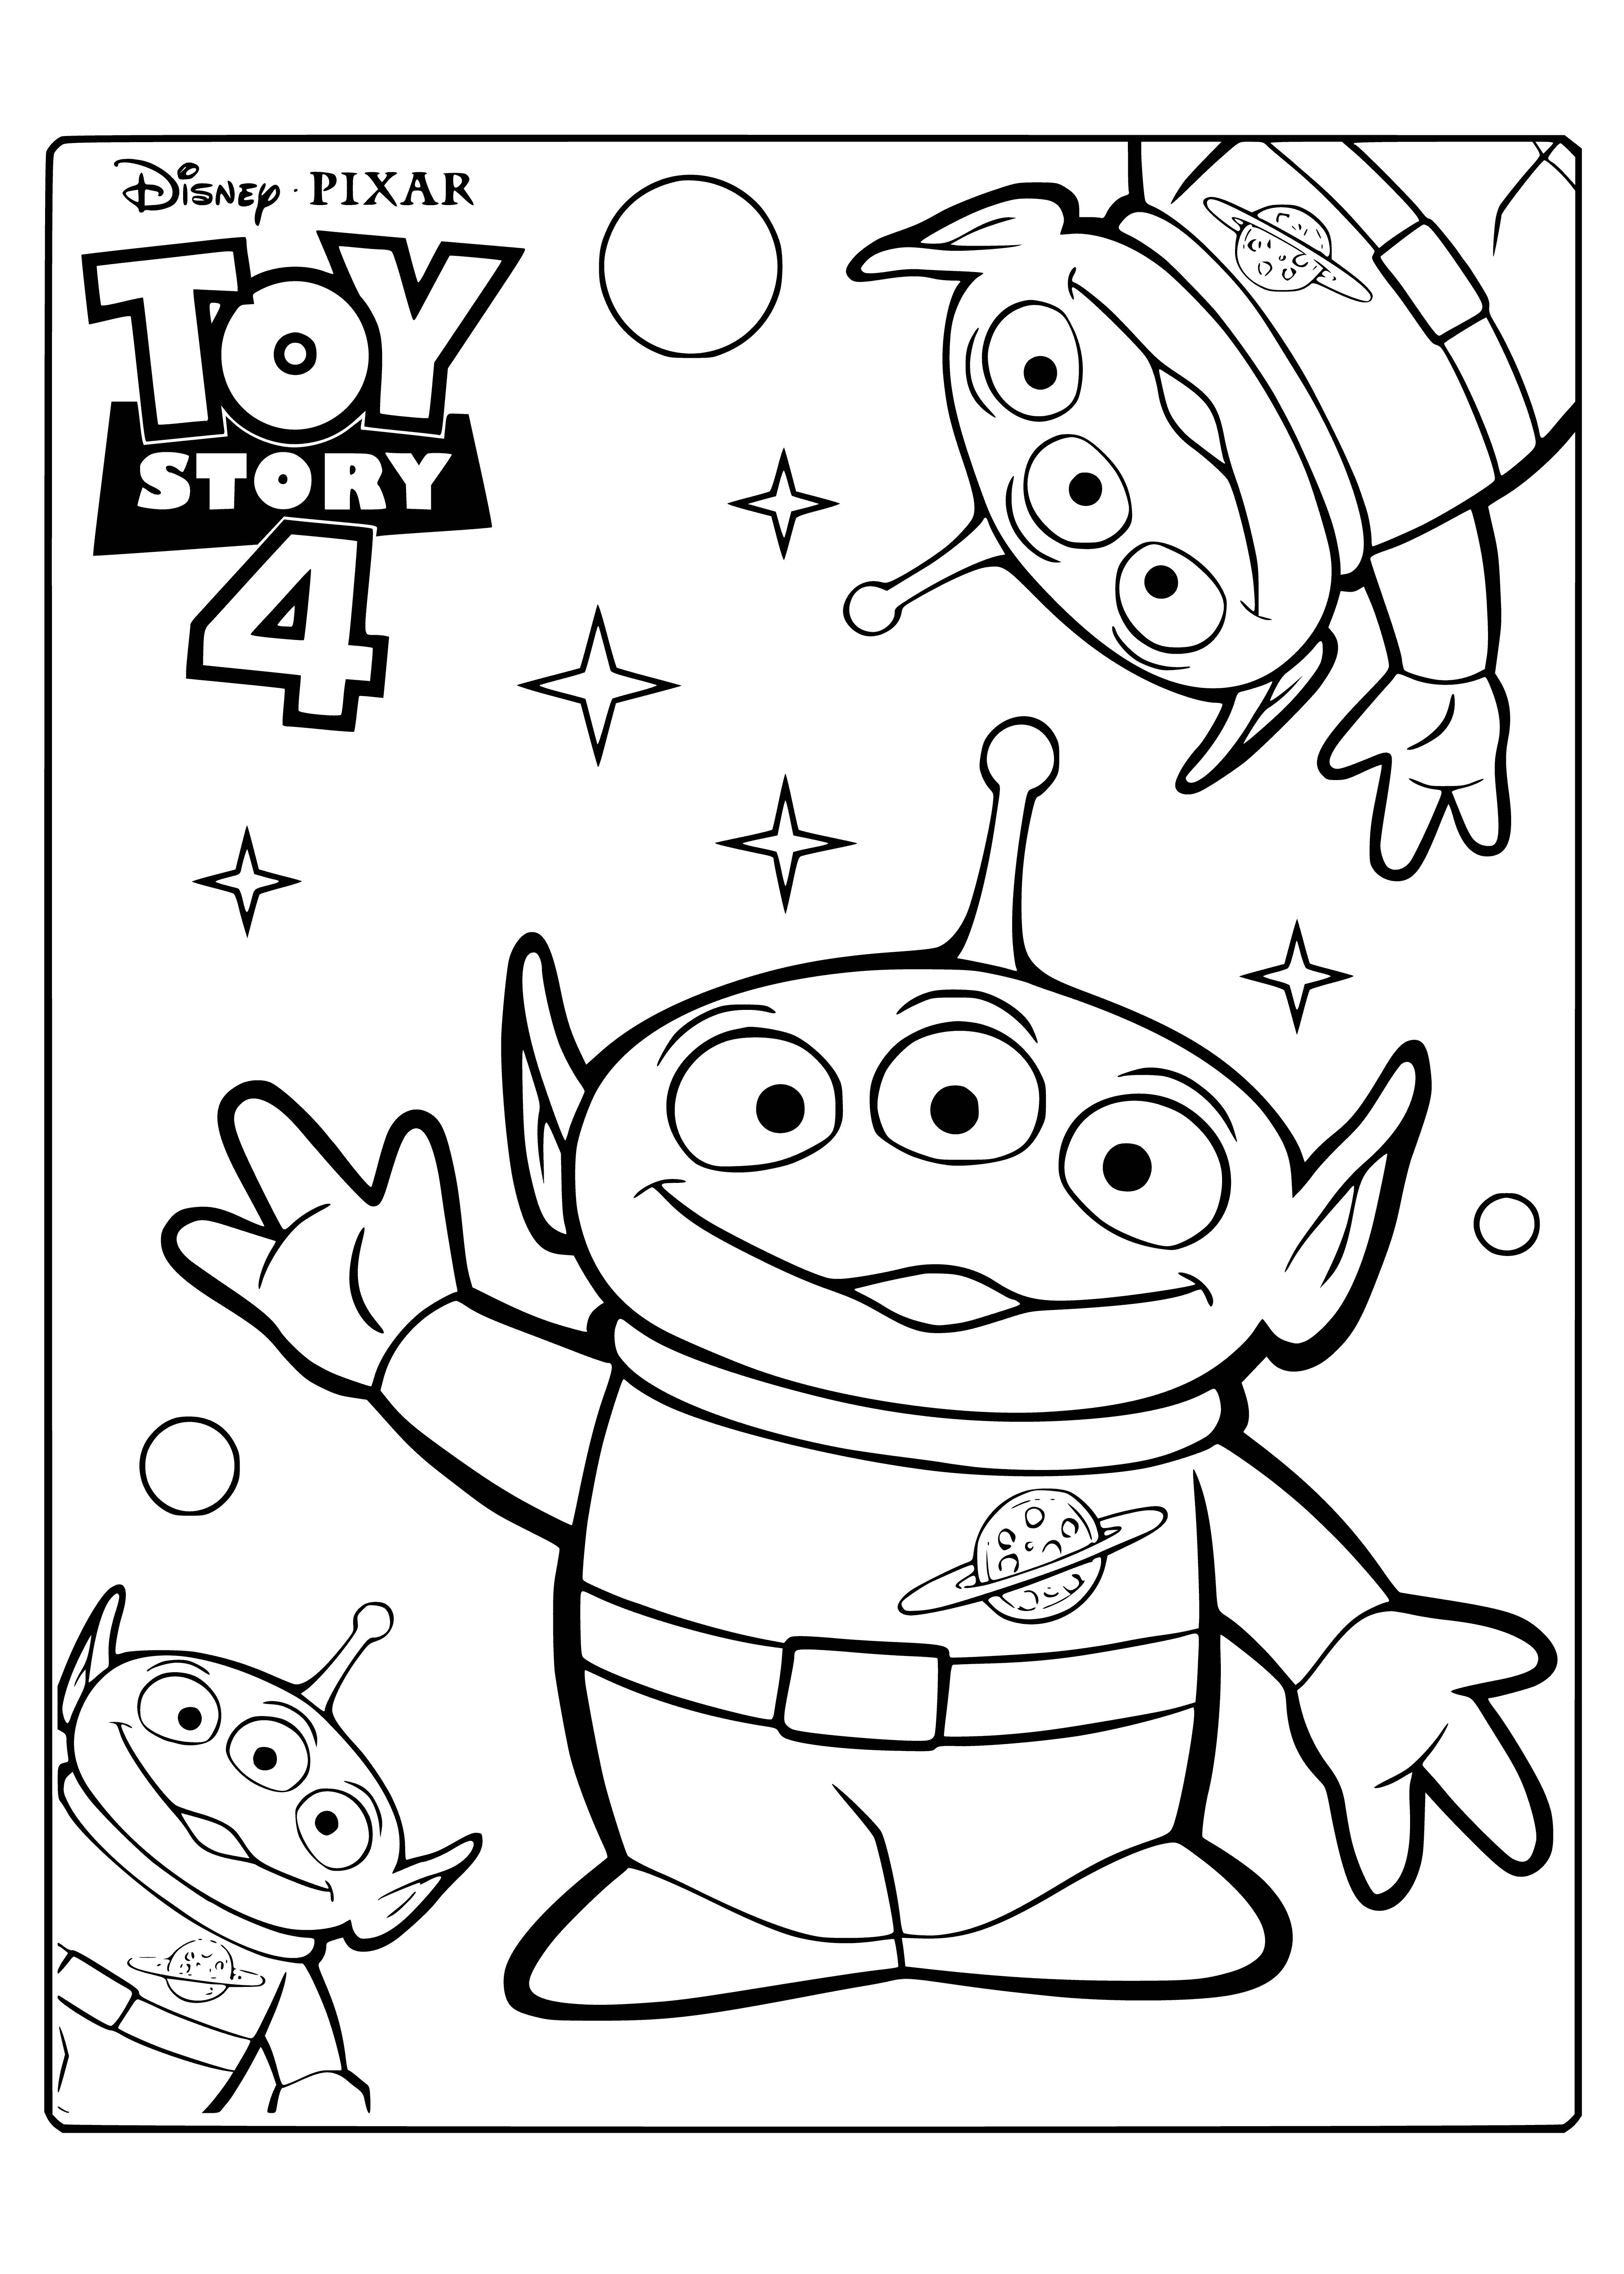 coloring page: 3 toy aliens standing on a table with a lamp behind them - they're green, have eyes & antennas.